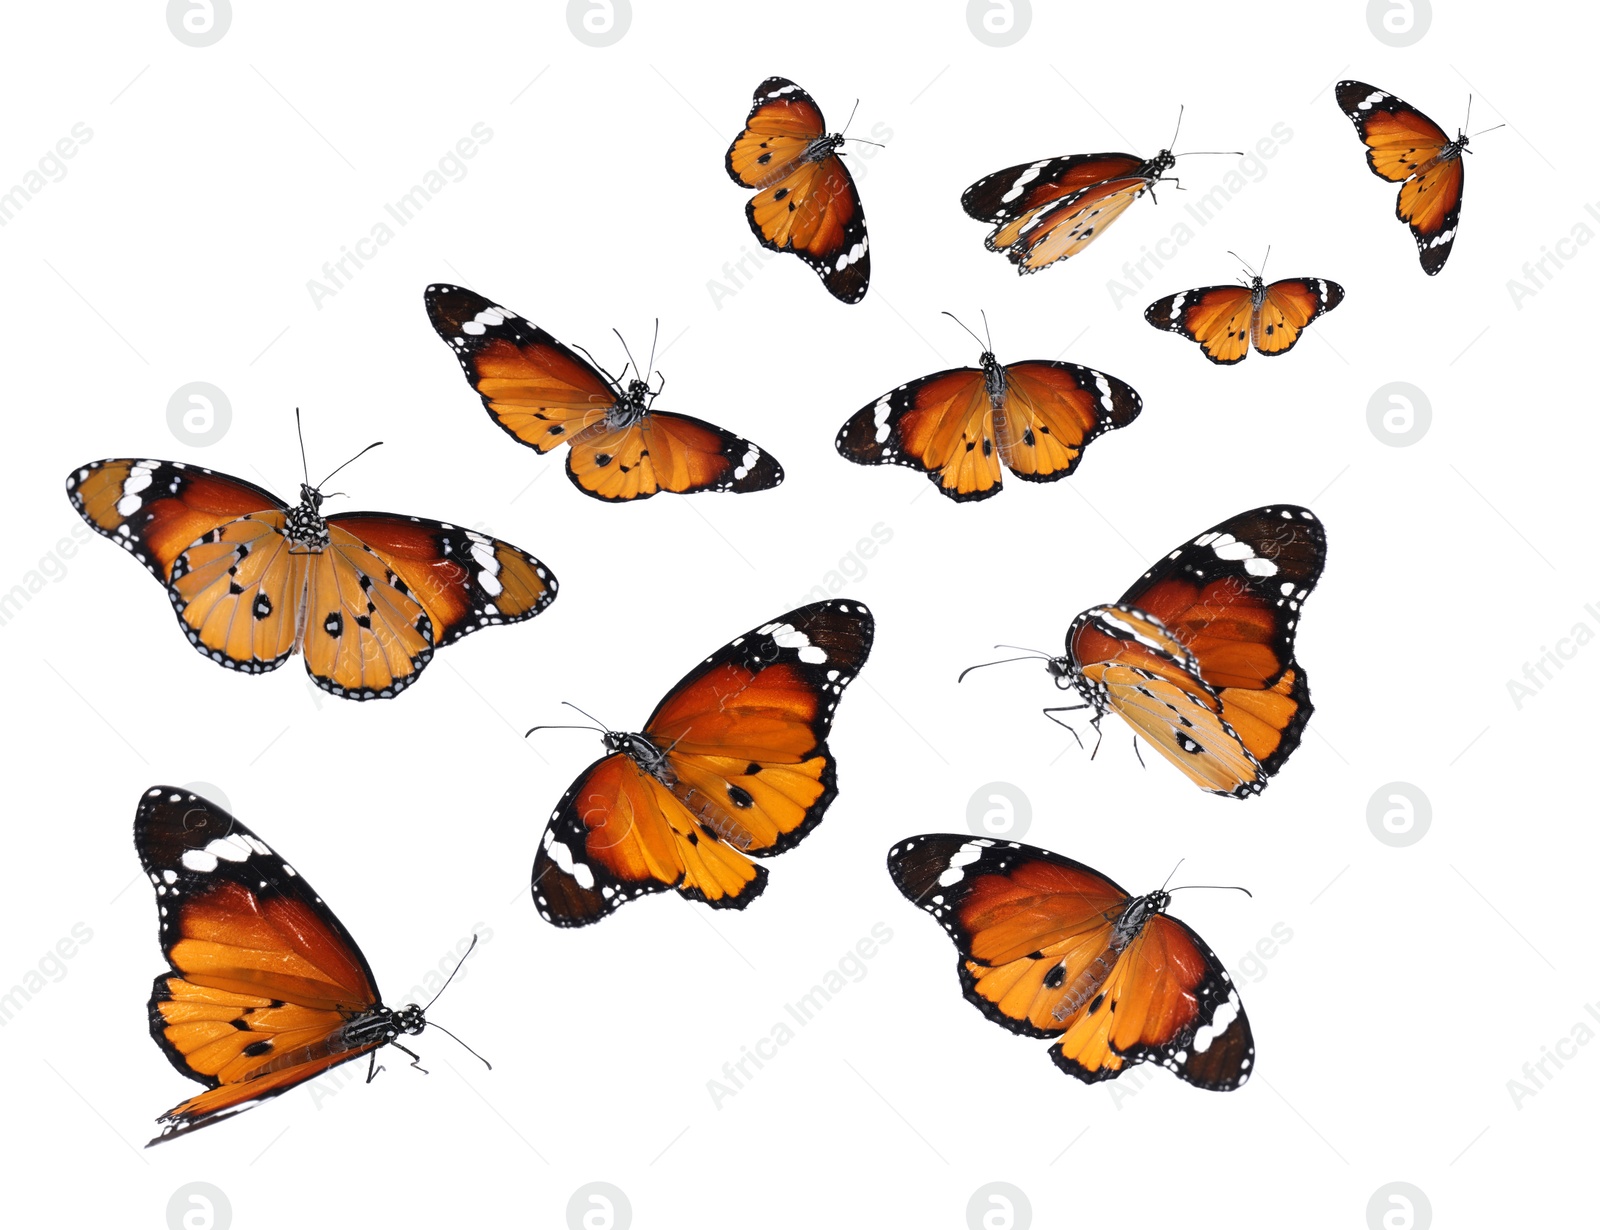 Image of Amazing plain tiger butterflies flying on white background